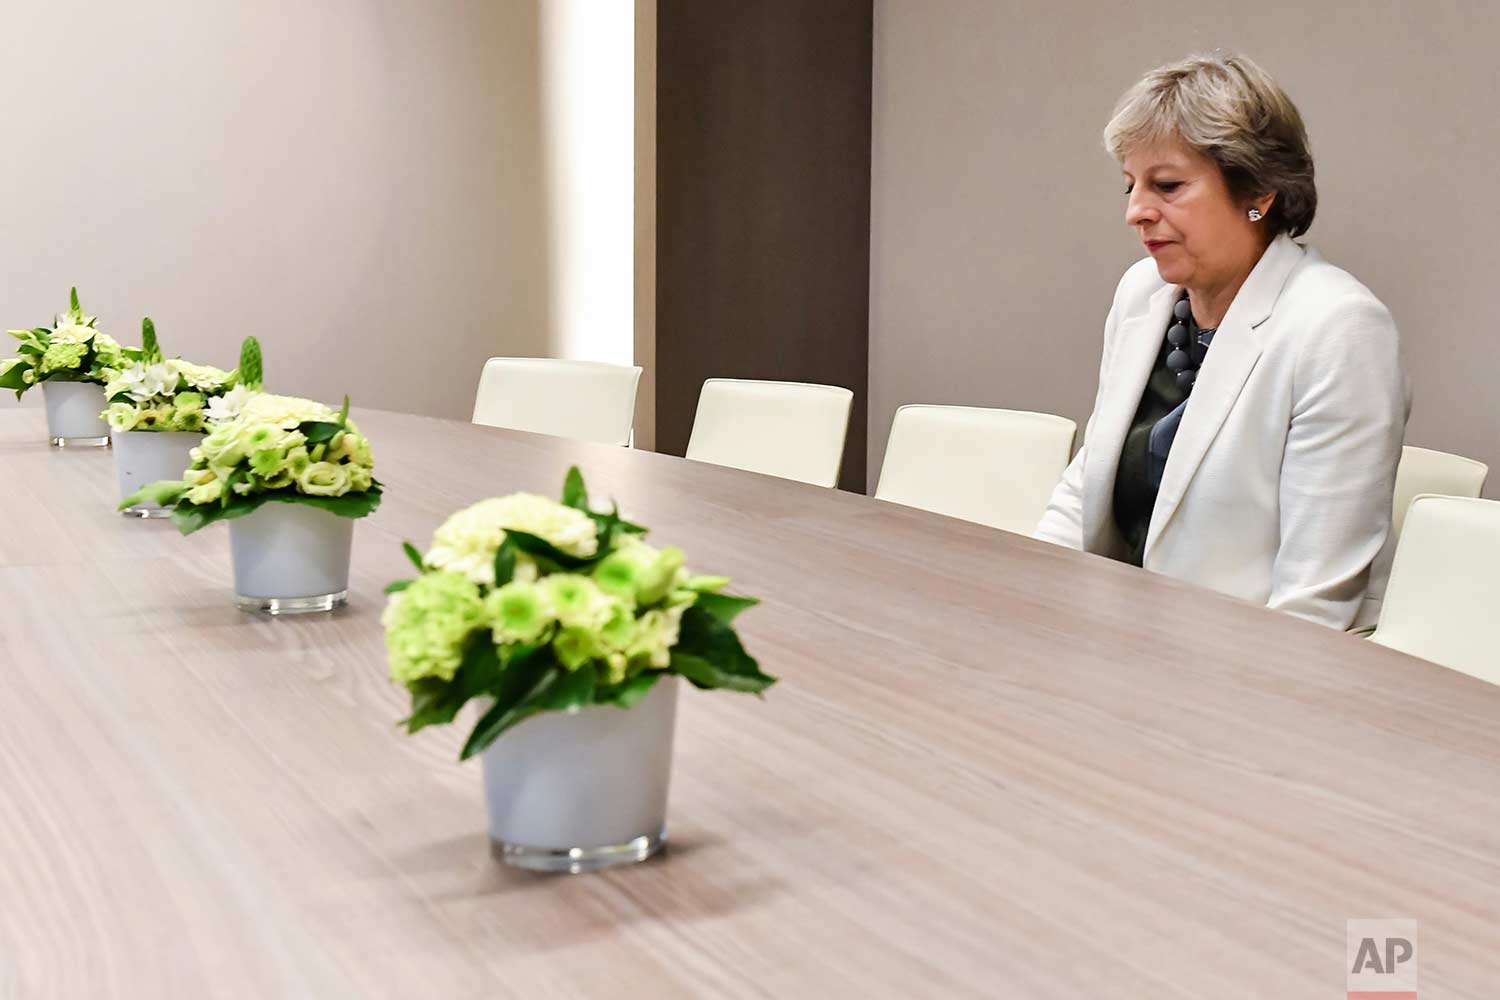  In this Friday, Oct. 20, 2017 photo, British Prime Minister Theresa May waits for the arrival of European Council President Donald Tusk prior to a bilateral meeting with European Council President Donald Tusk during an EU summit in Brussels. Europea